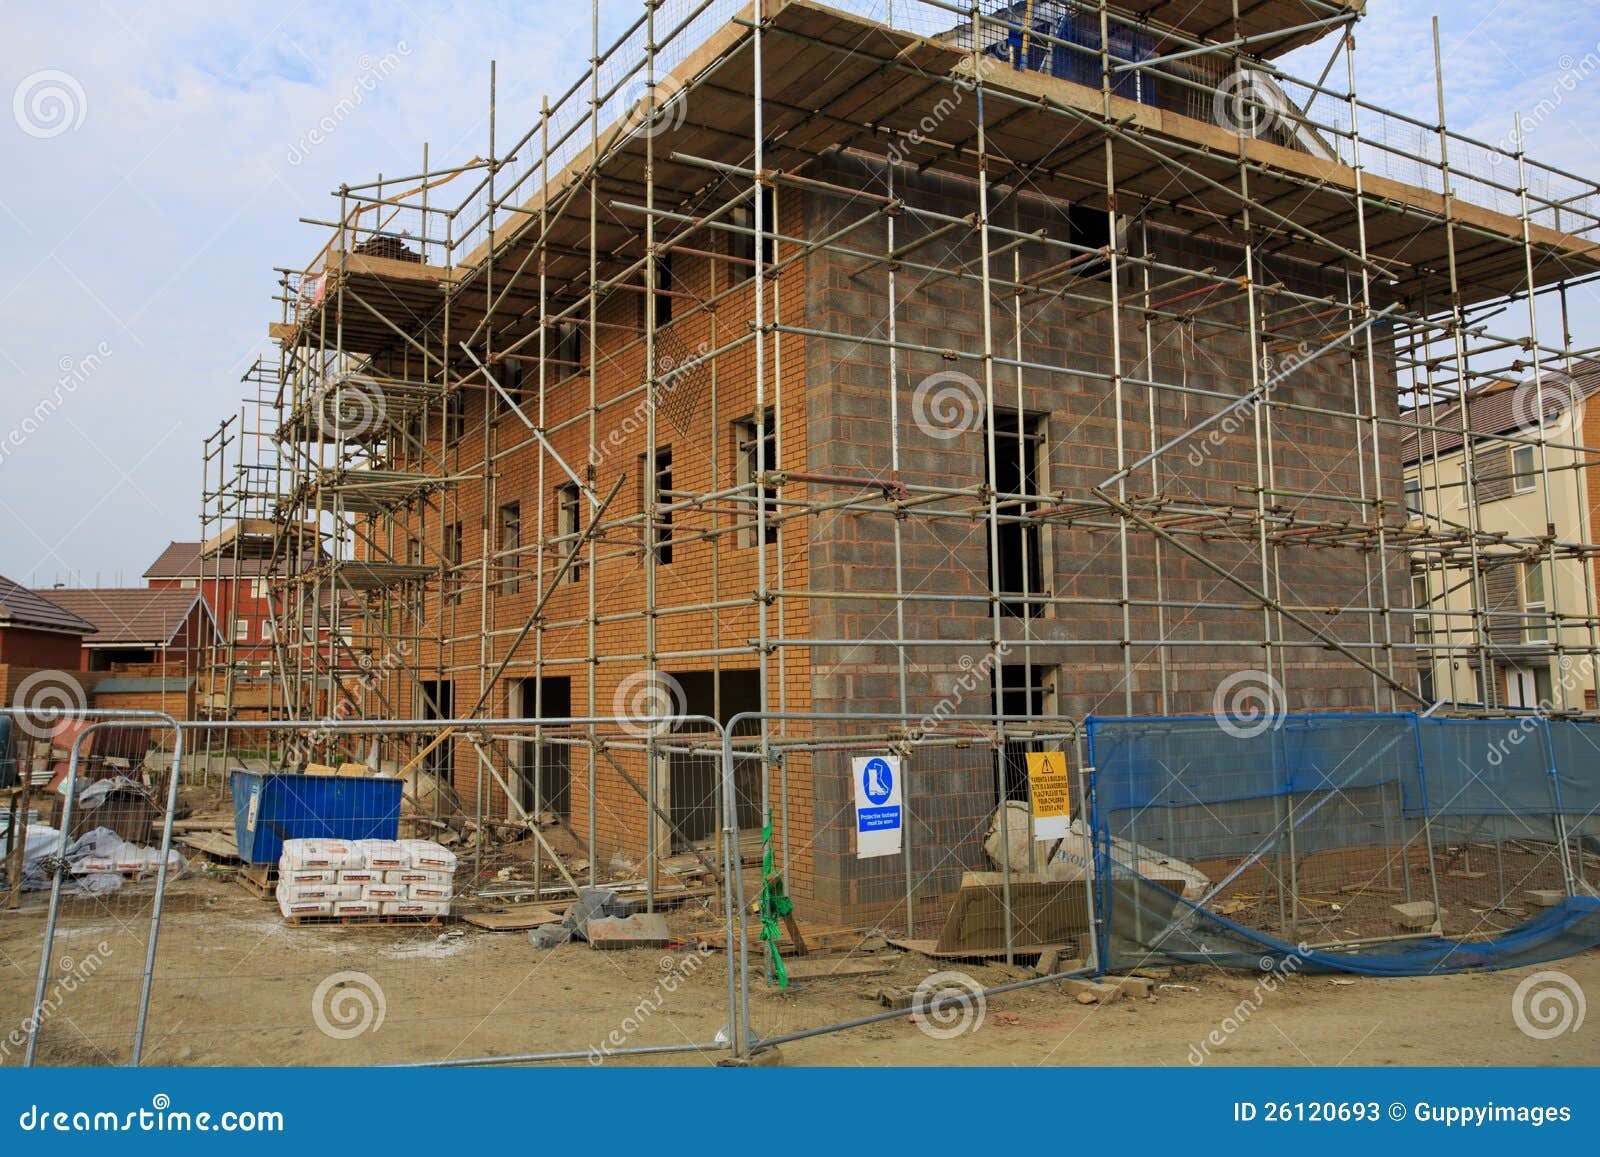 construction of new houses with scaffolding